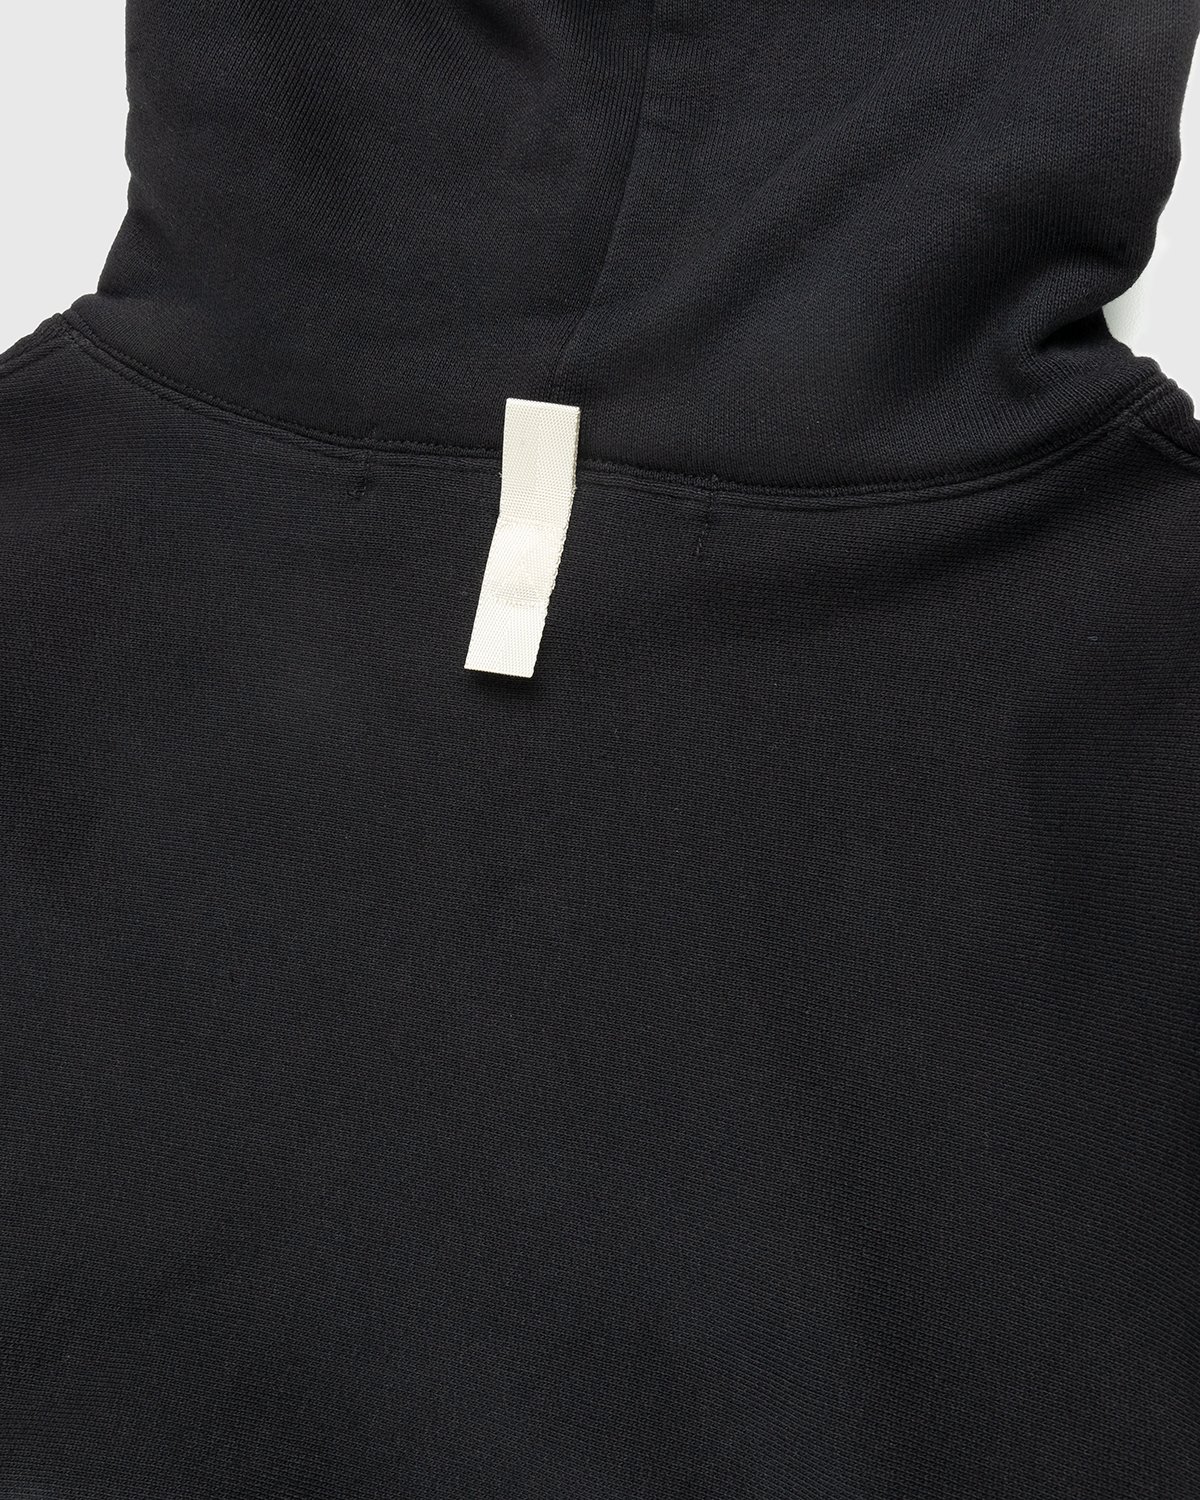 Abc. - Pullover Hoodie Anthracite - Clothing - Black - Image 3